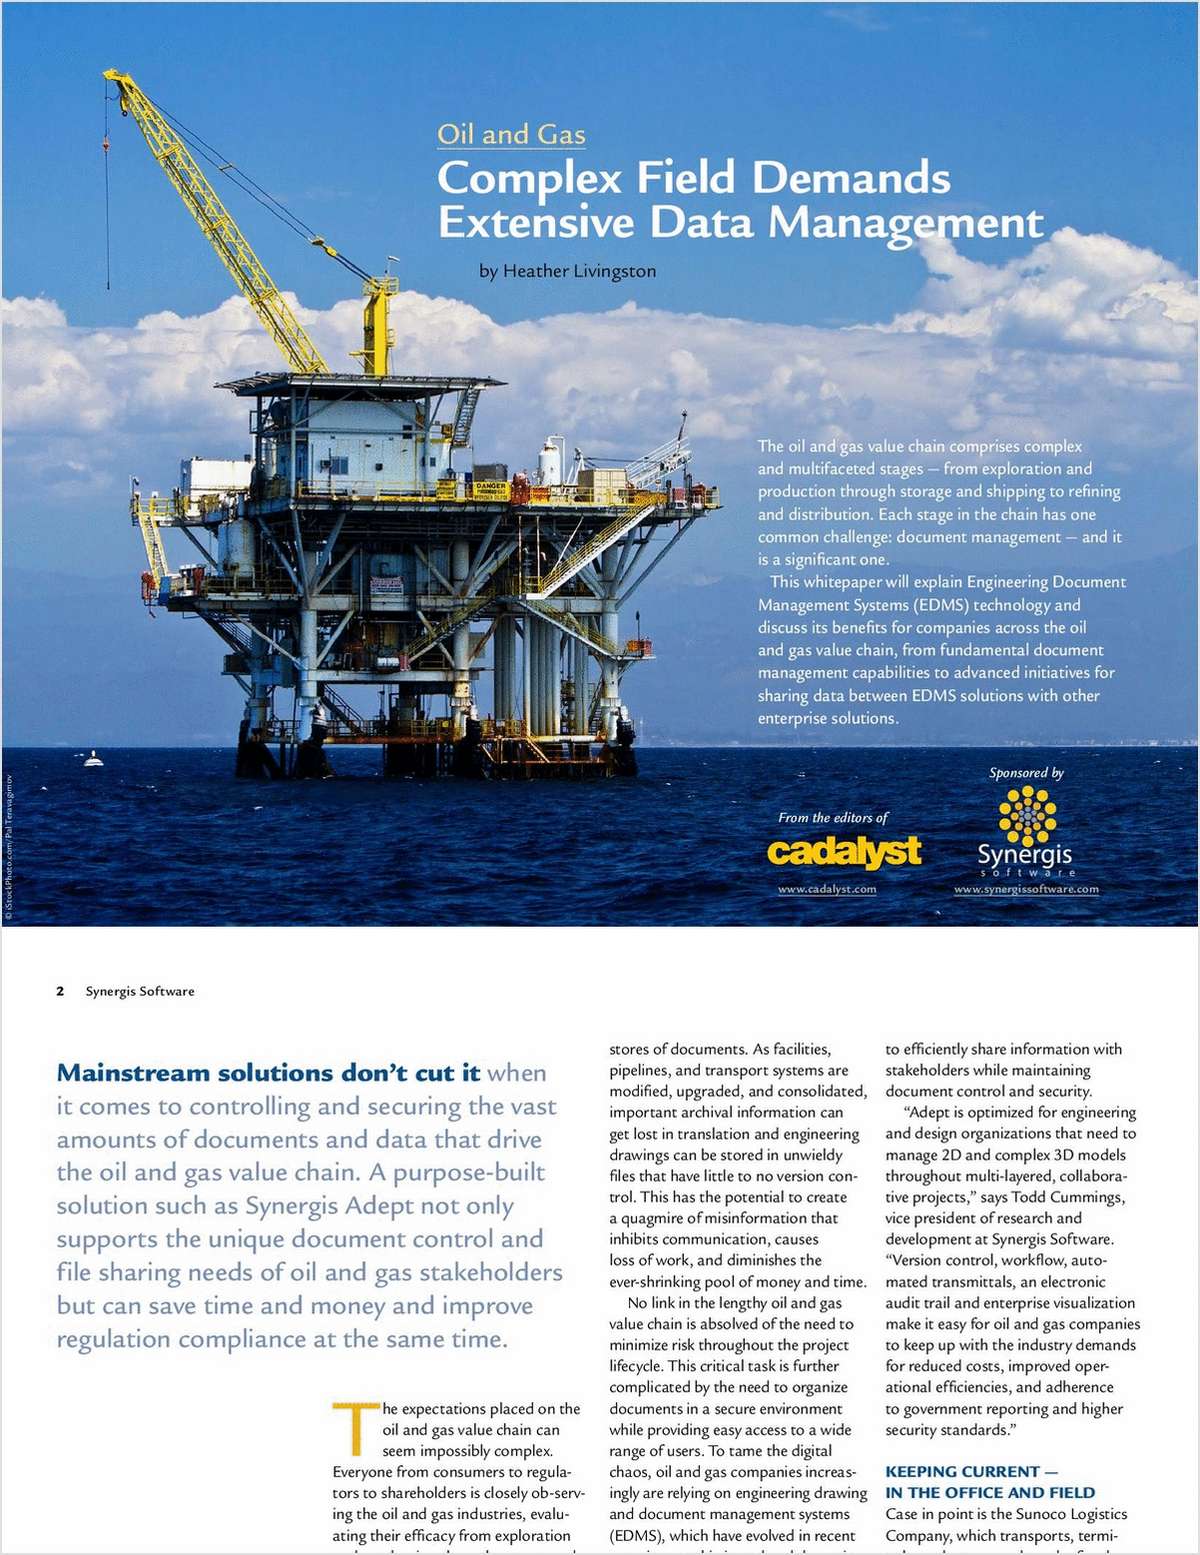 Tackling Engineering Document Management Chaos in the Oil & Gas Industry